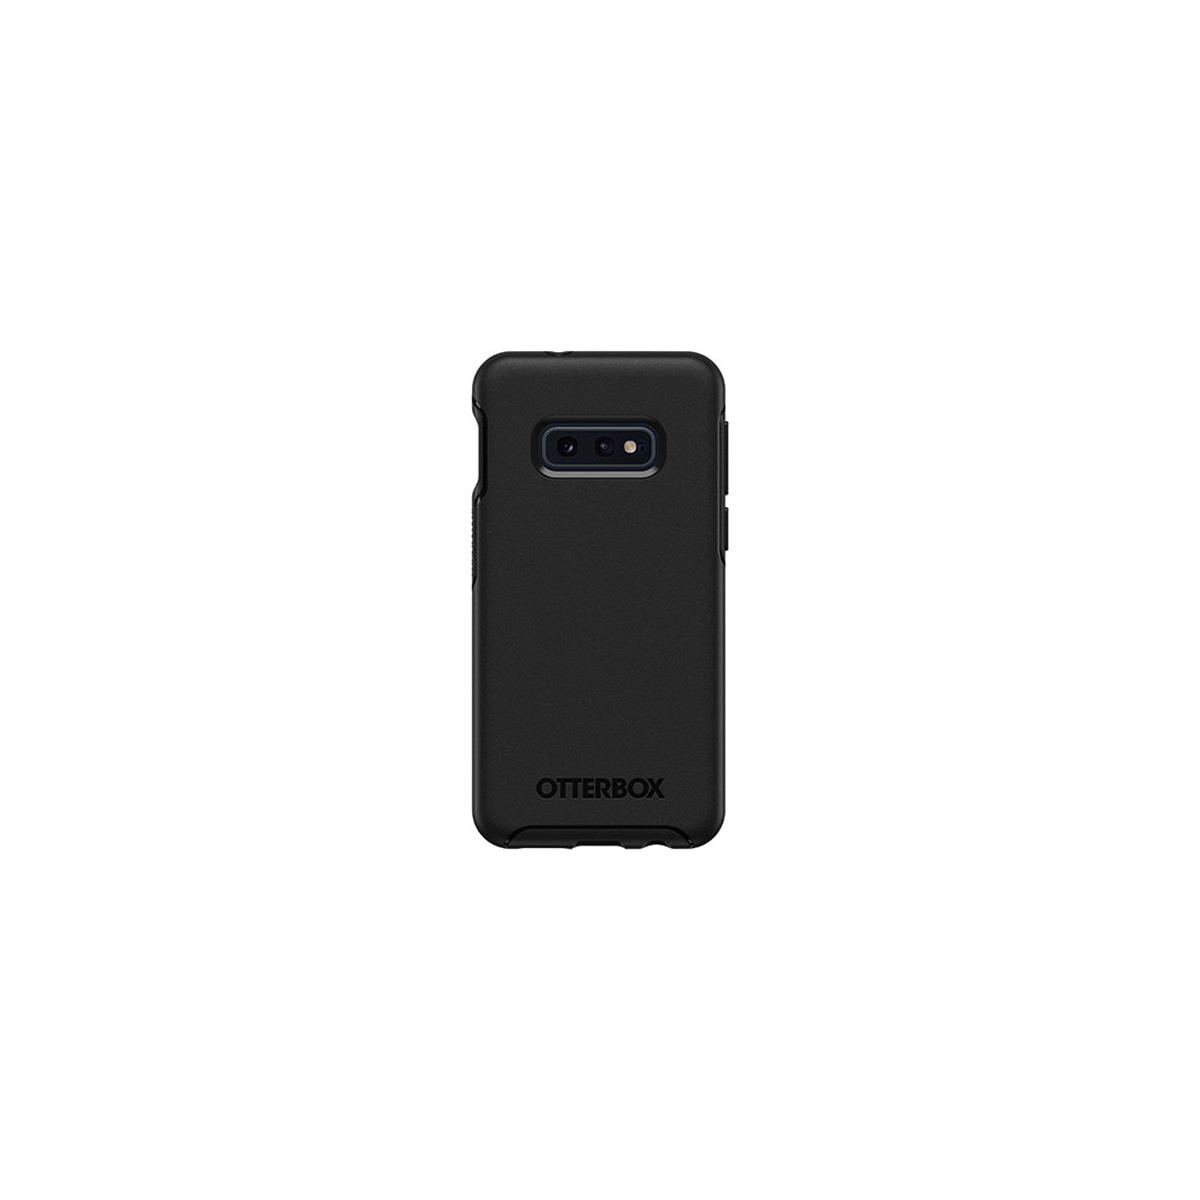 Image of OtterBox Symmetry Series Case for Samsung Galaxy S10e Smartphone